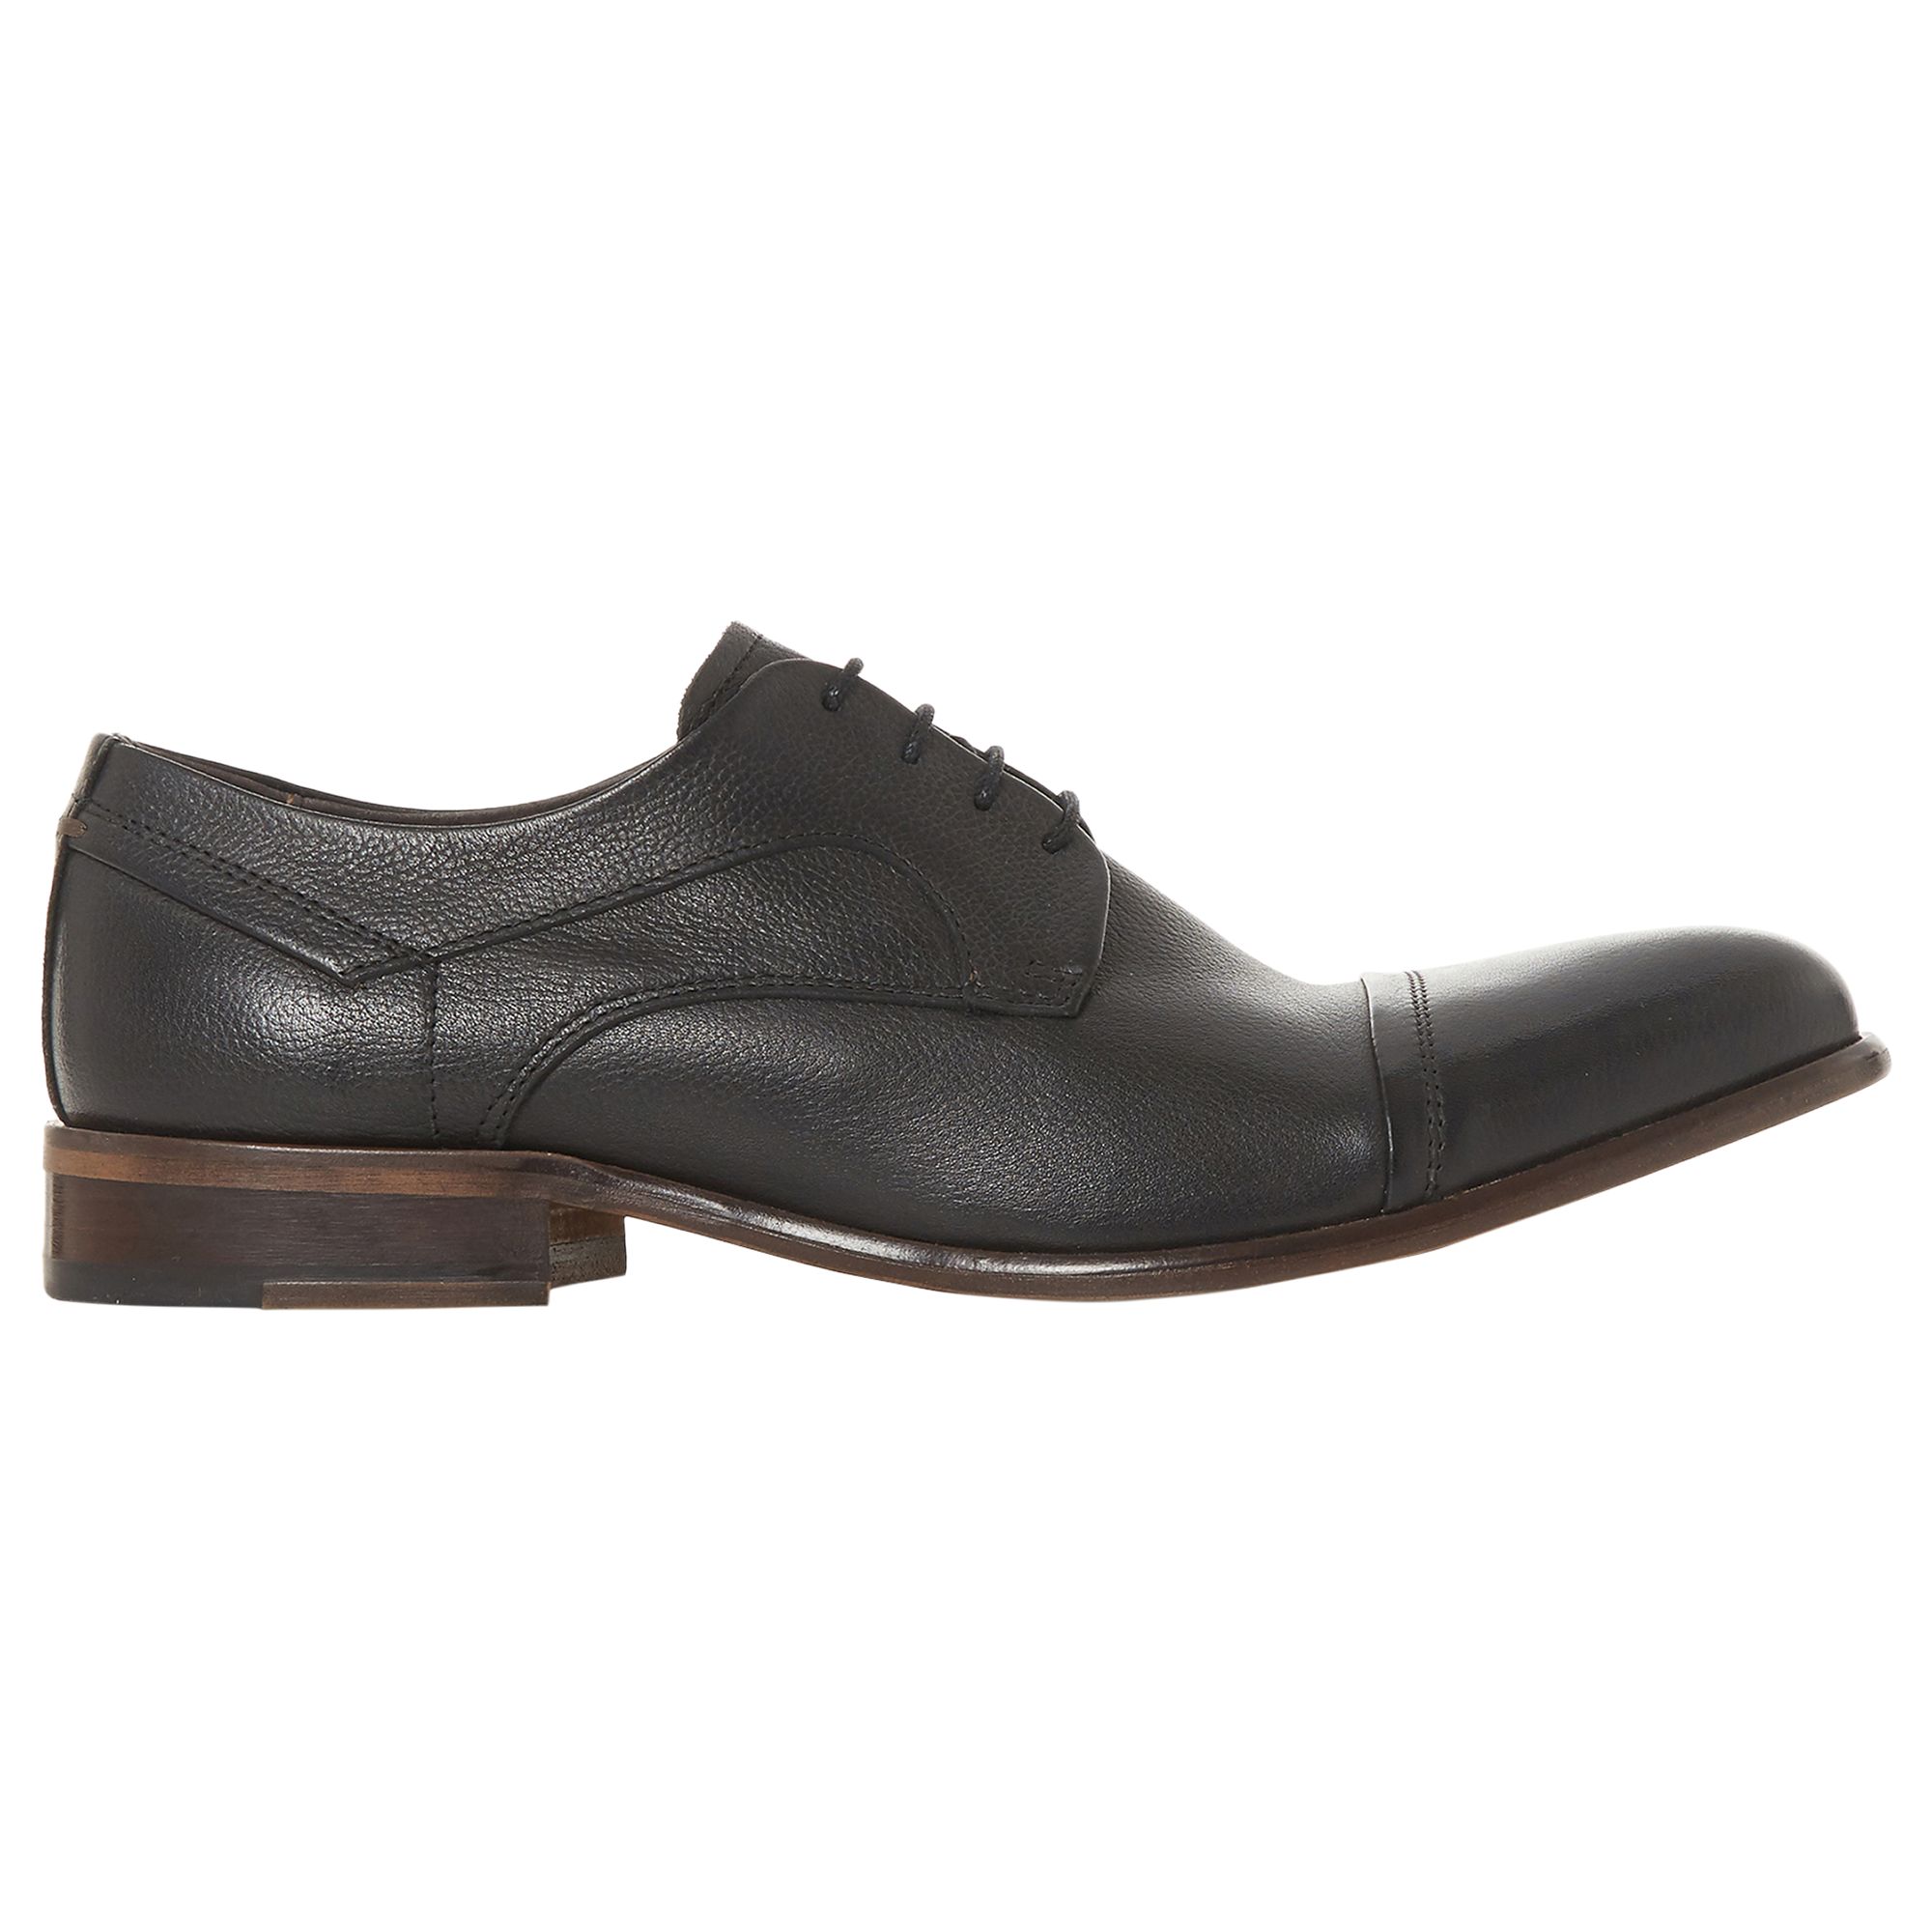 Bertie Parallel Stitched Toe Cap Gibson Shoes, Black